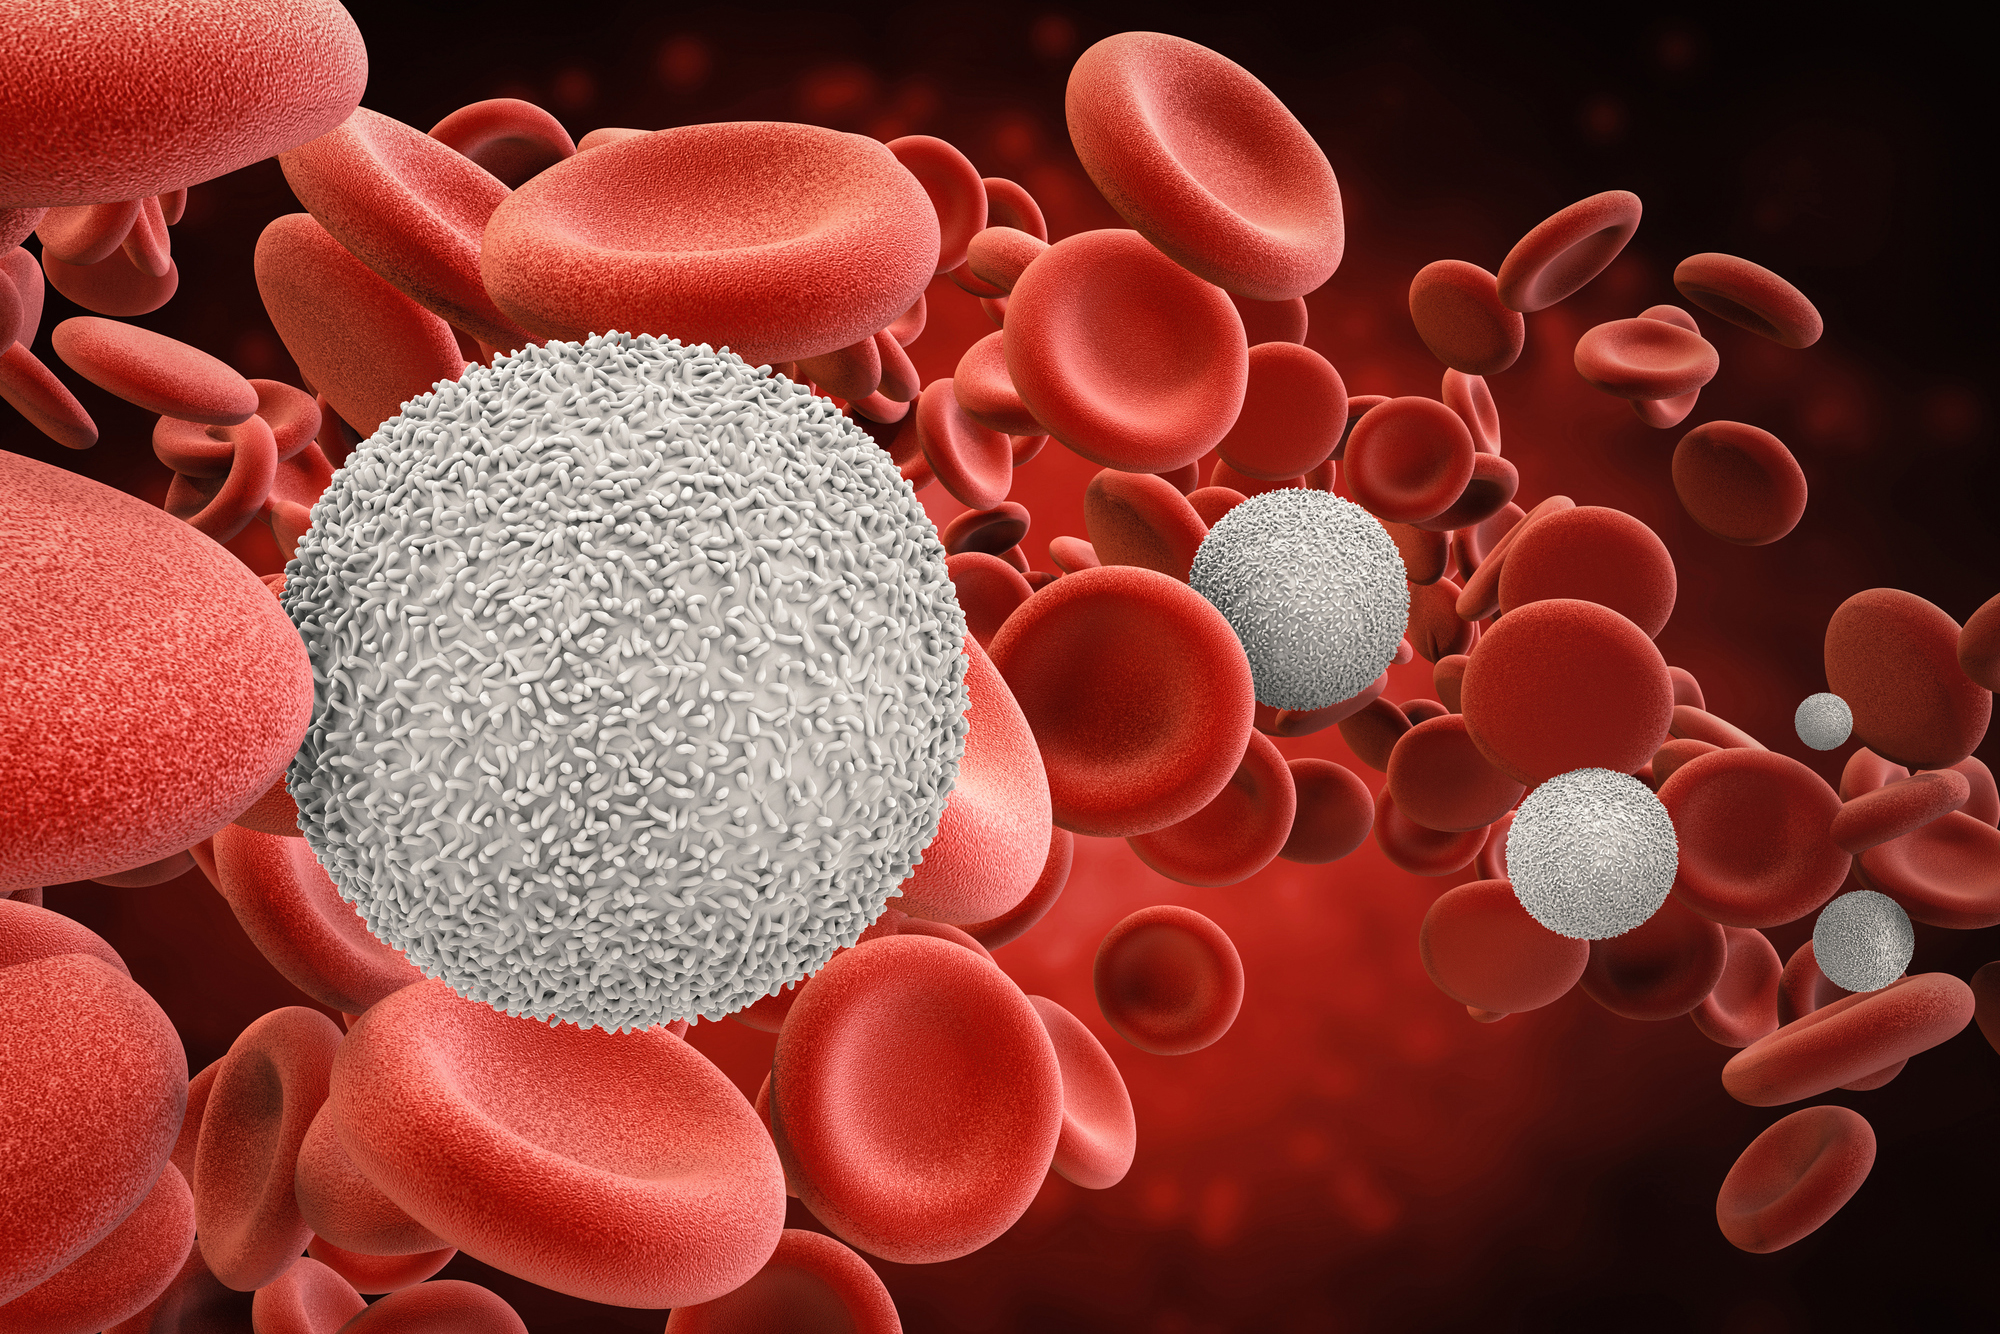 Microscopic rendering of a white blood cell amongst red blood cells.